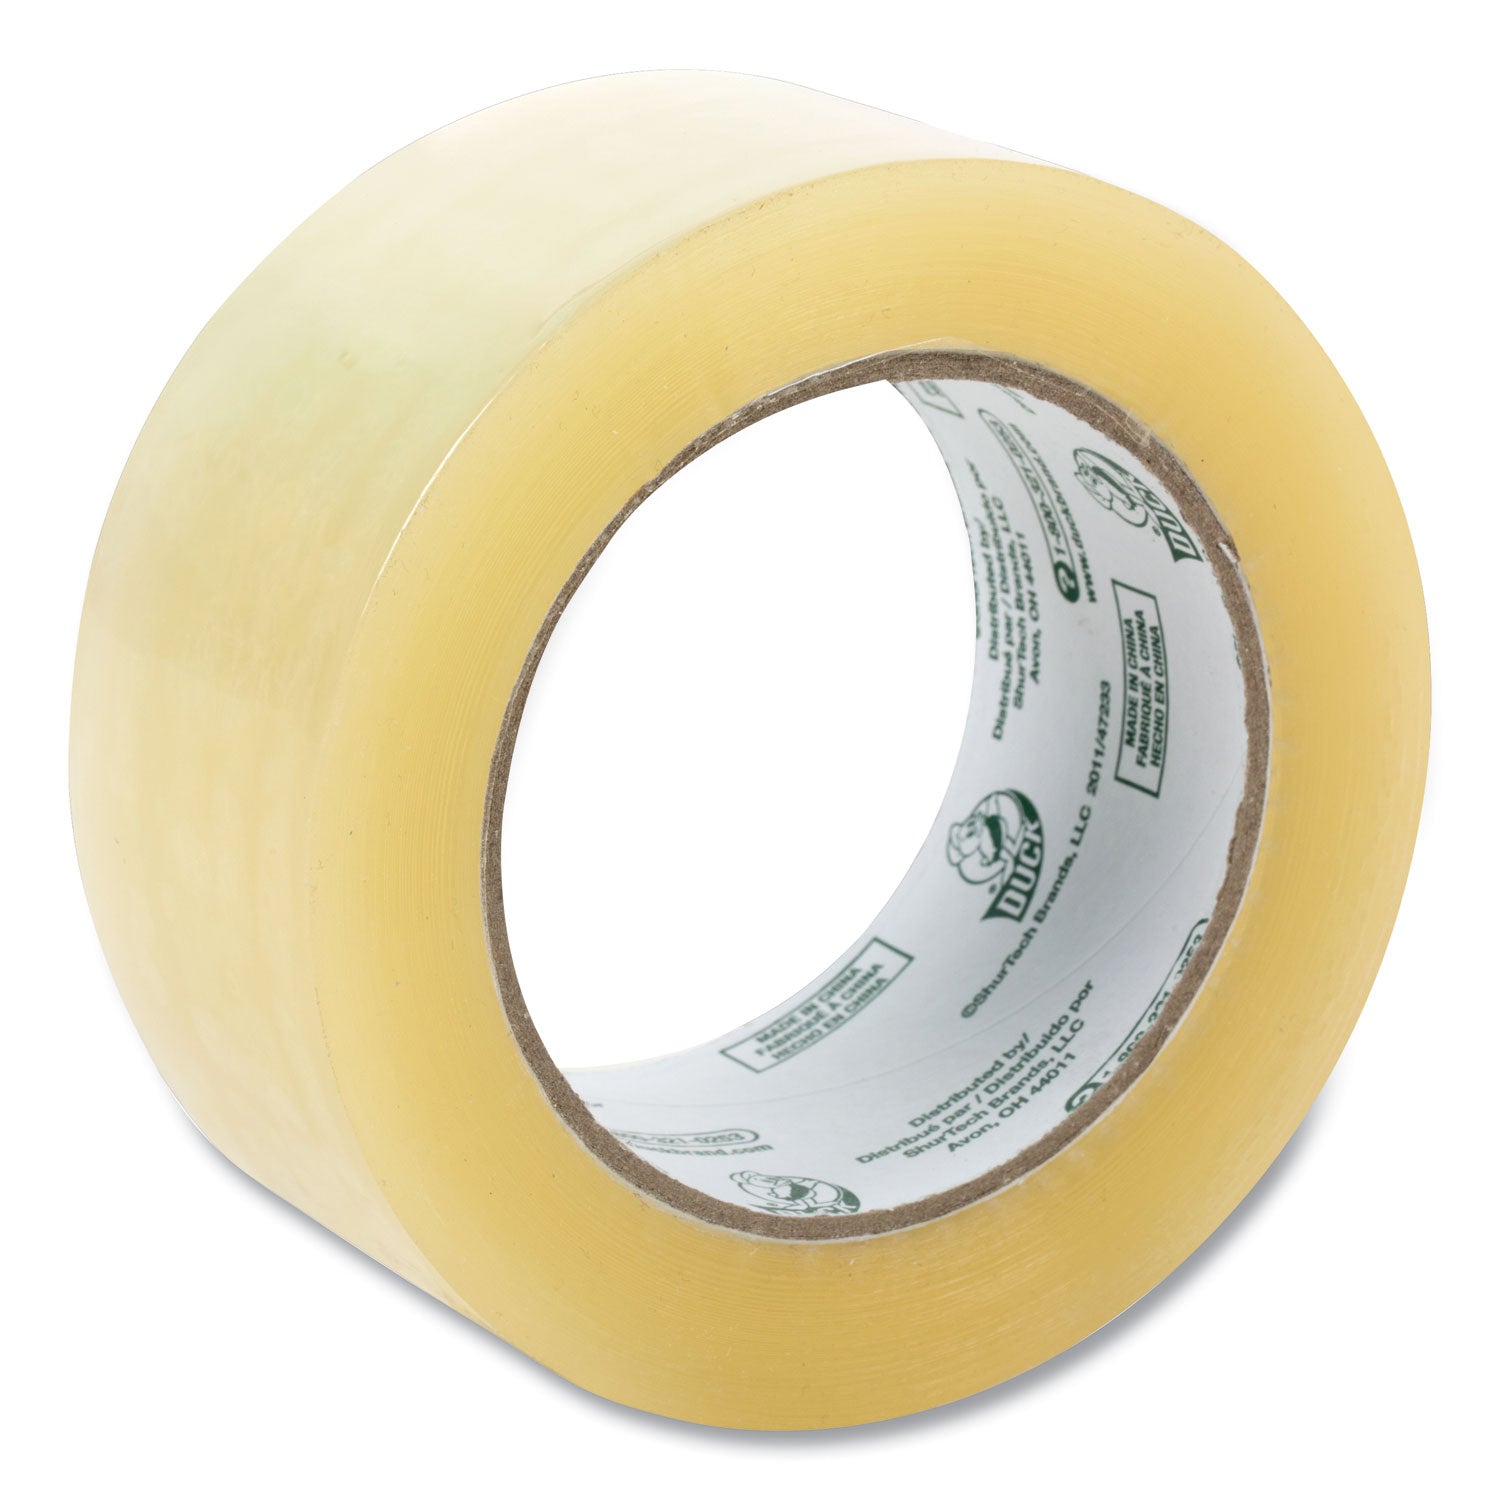 Commercial Grade Packaging Tape, 3" Core, 1.88" x 109 yds, Clear, 6/Pack - 